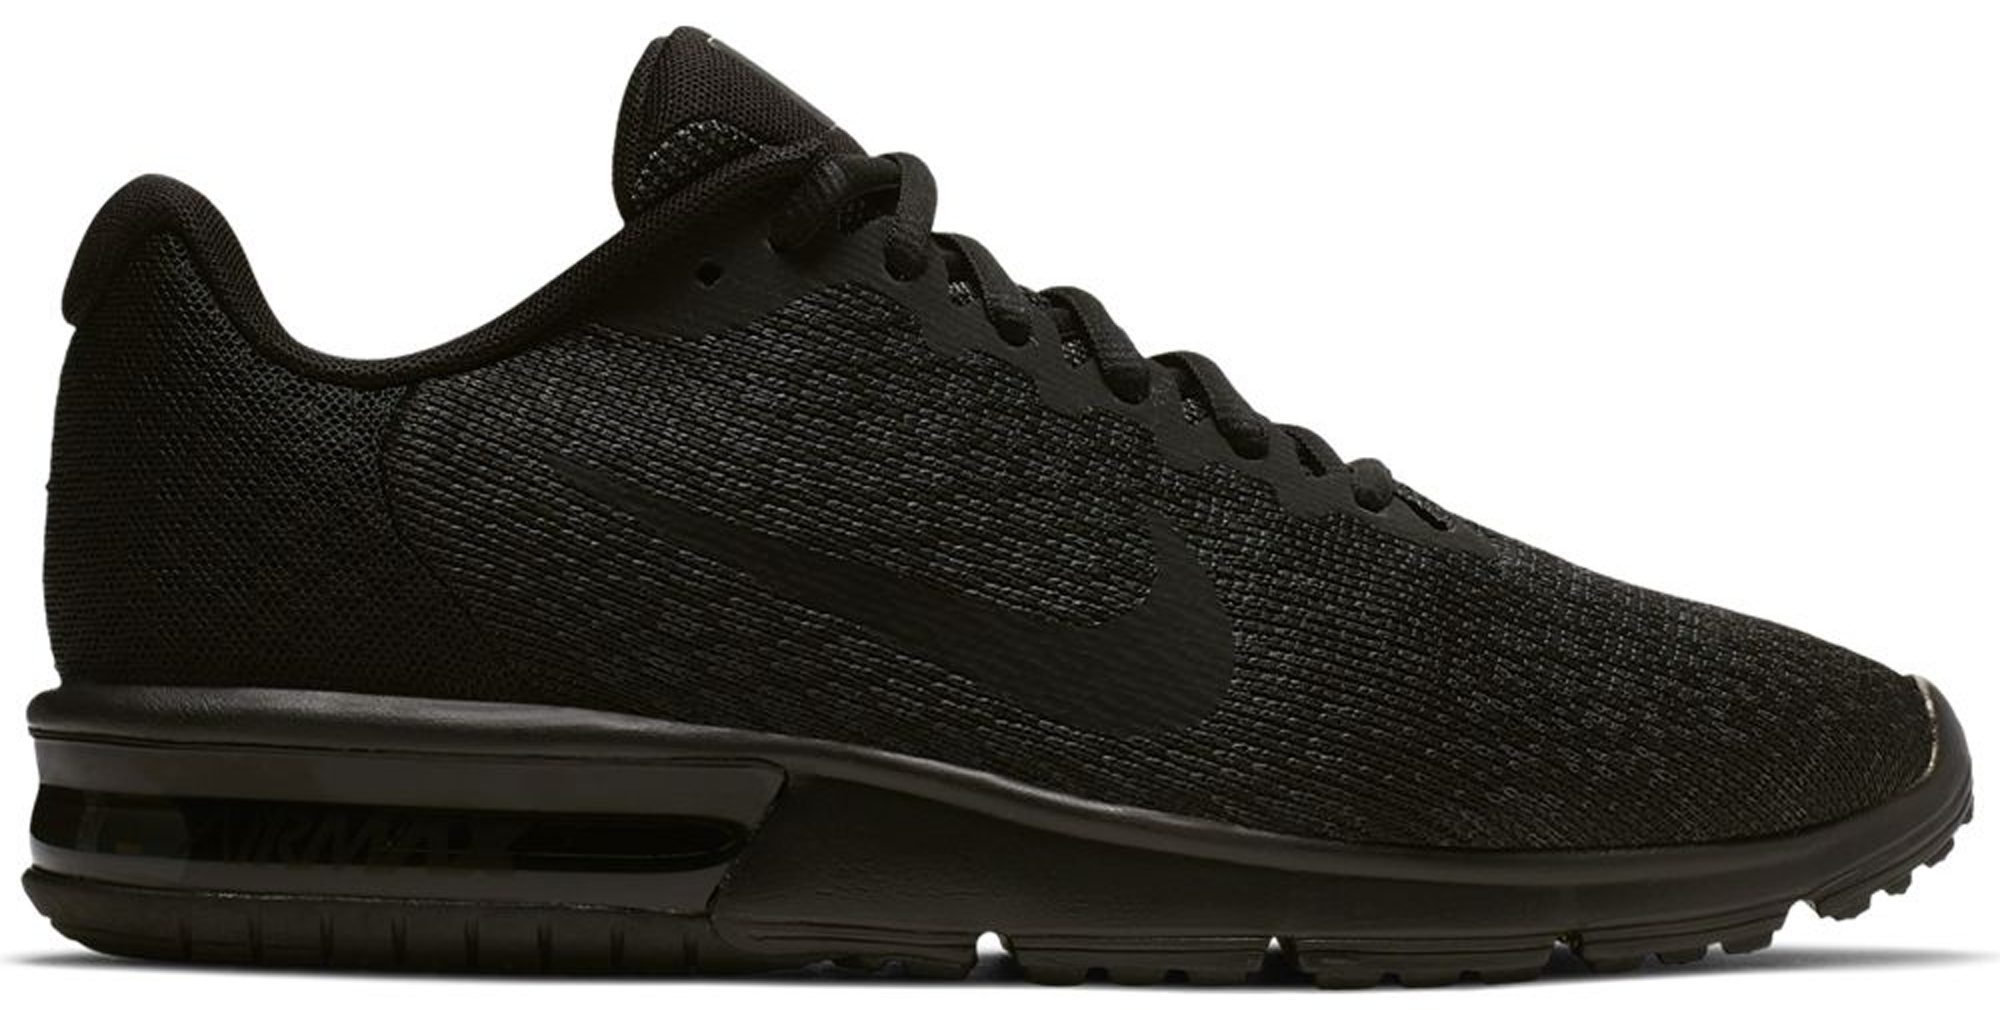 nike air max sequent 2 india